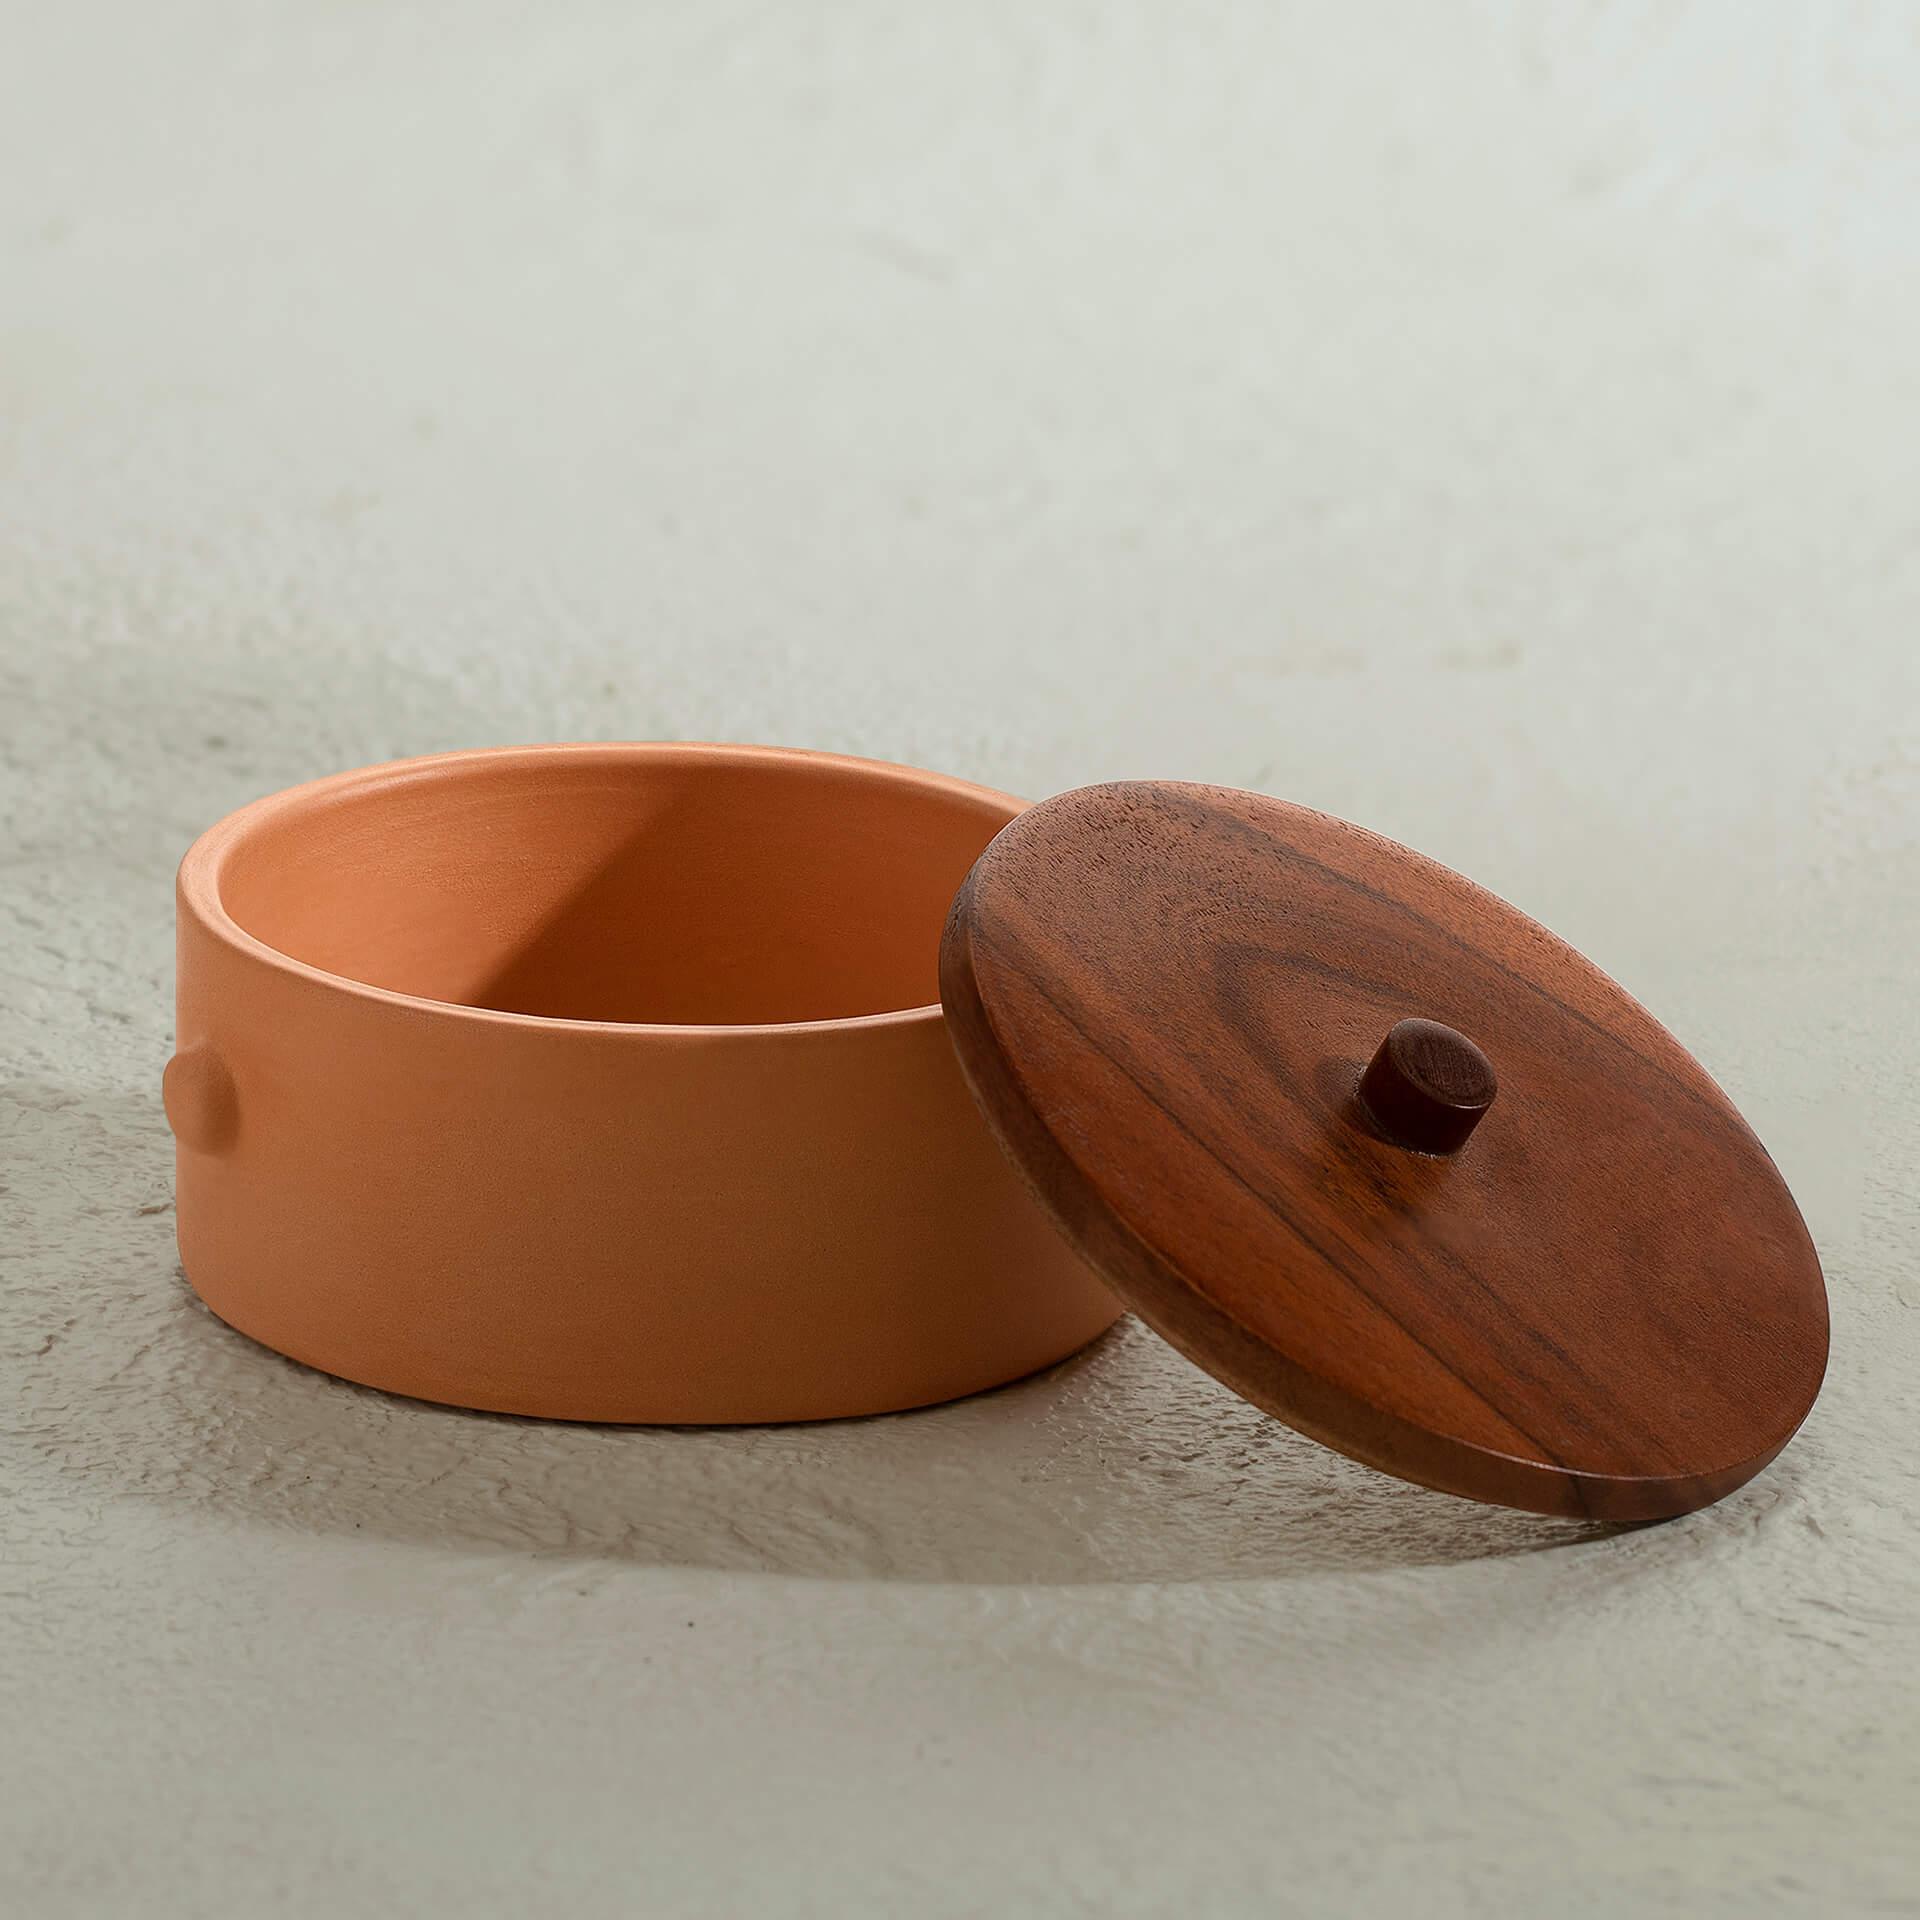 Knurl Terracotta Curd Setter with Wooden Lid(Small)